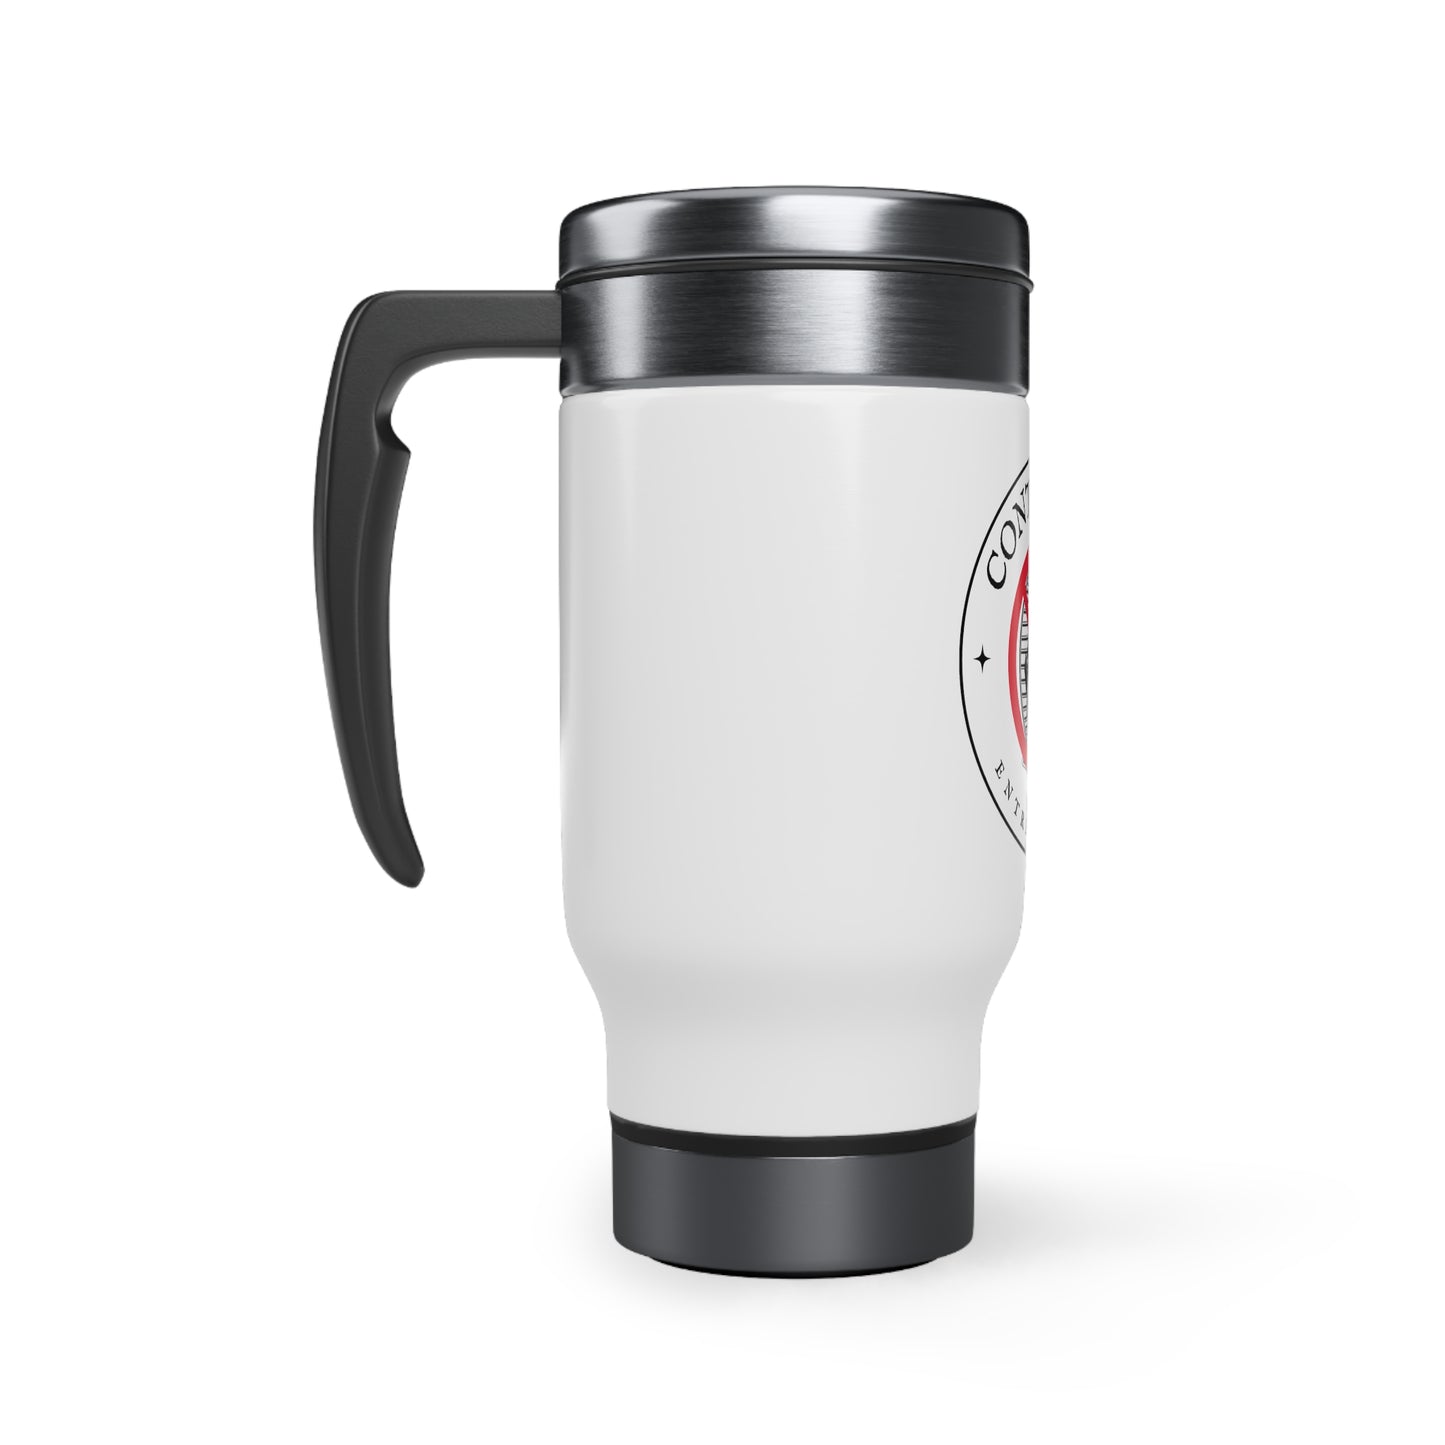 Contrarian Entrepreneur Stainless Steel Travel Mug with Handle, 14oz